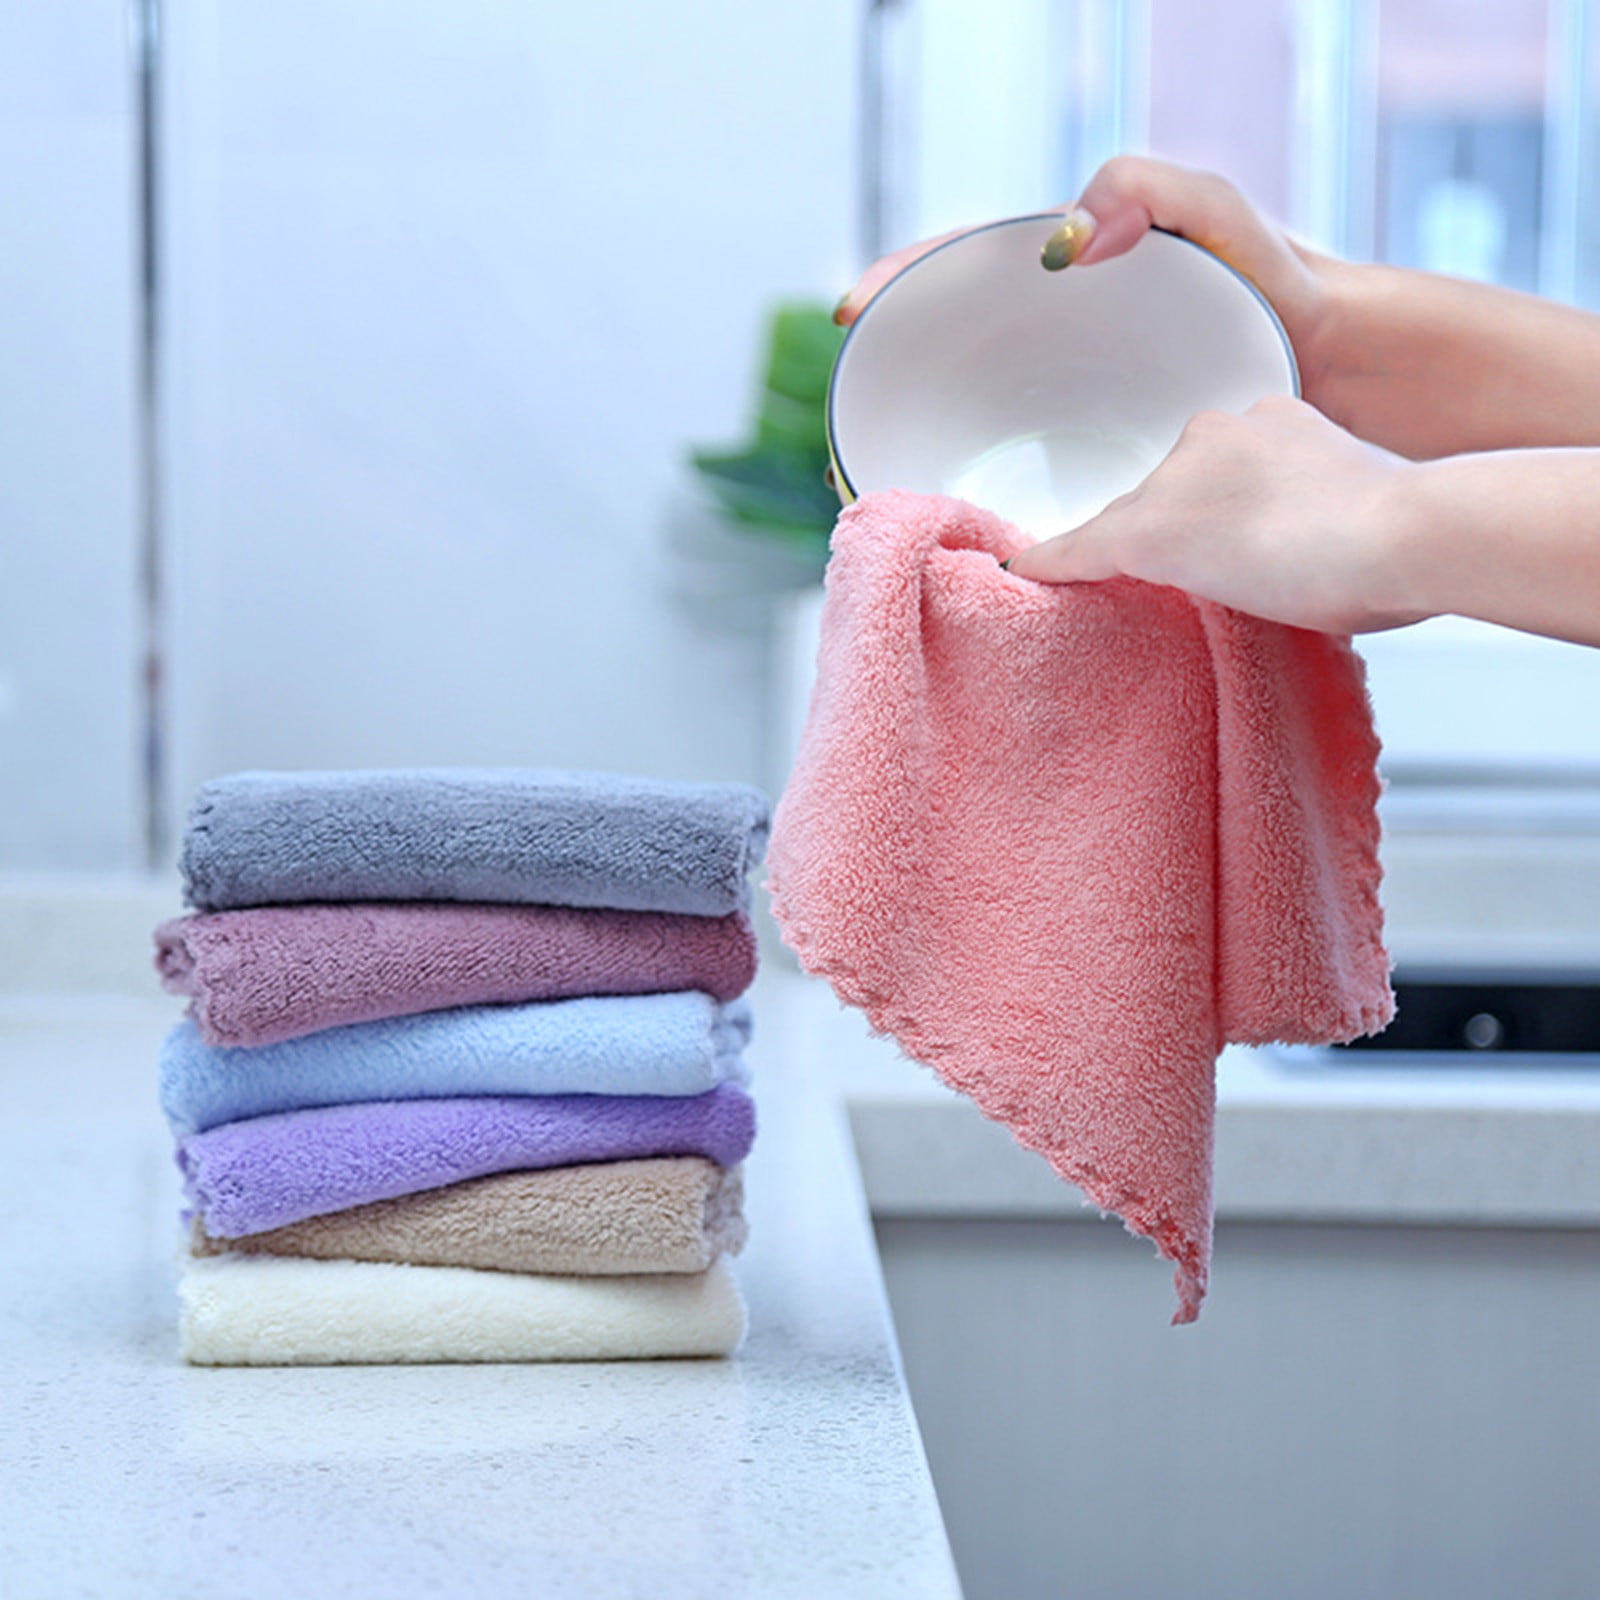 Details about   Mixed Fruit Swedish Dishcloths Reusable Dish Towels Absorbent and Fast Dry Clean 